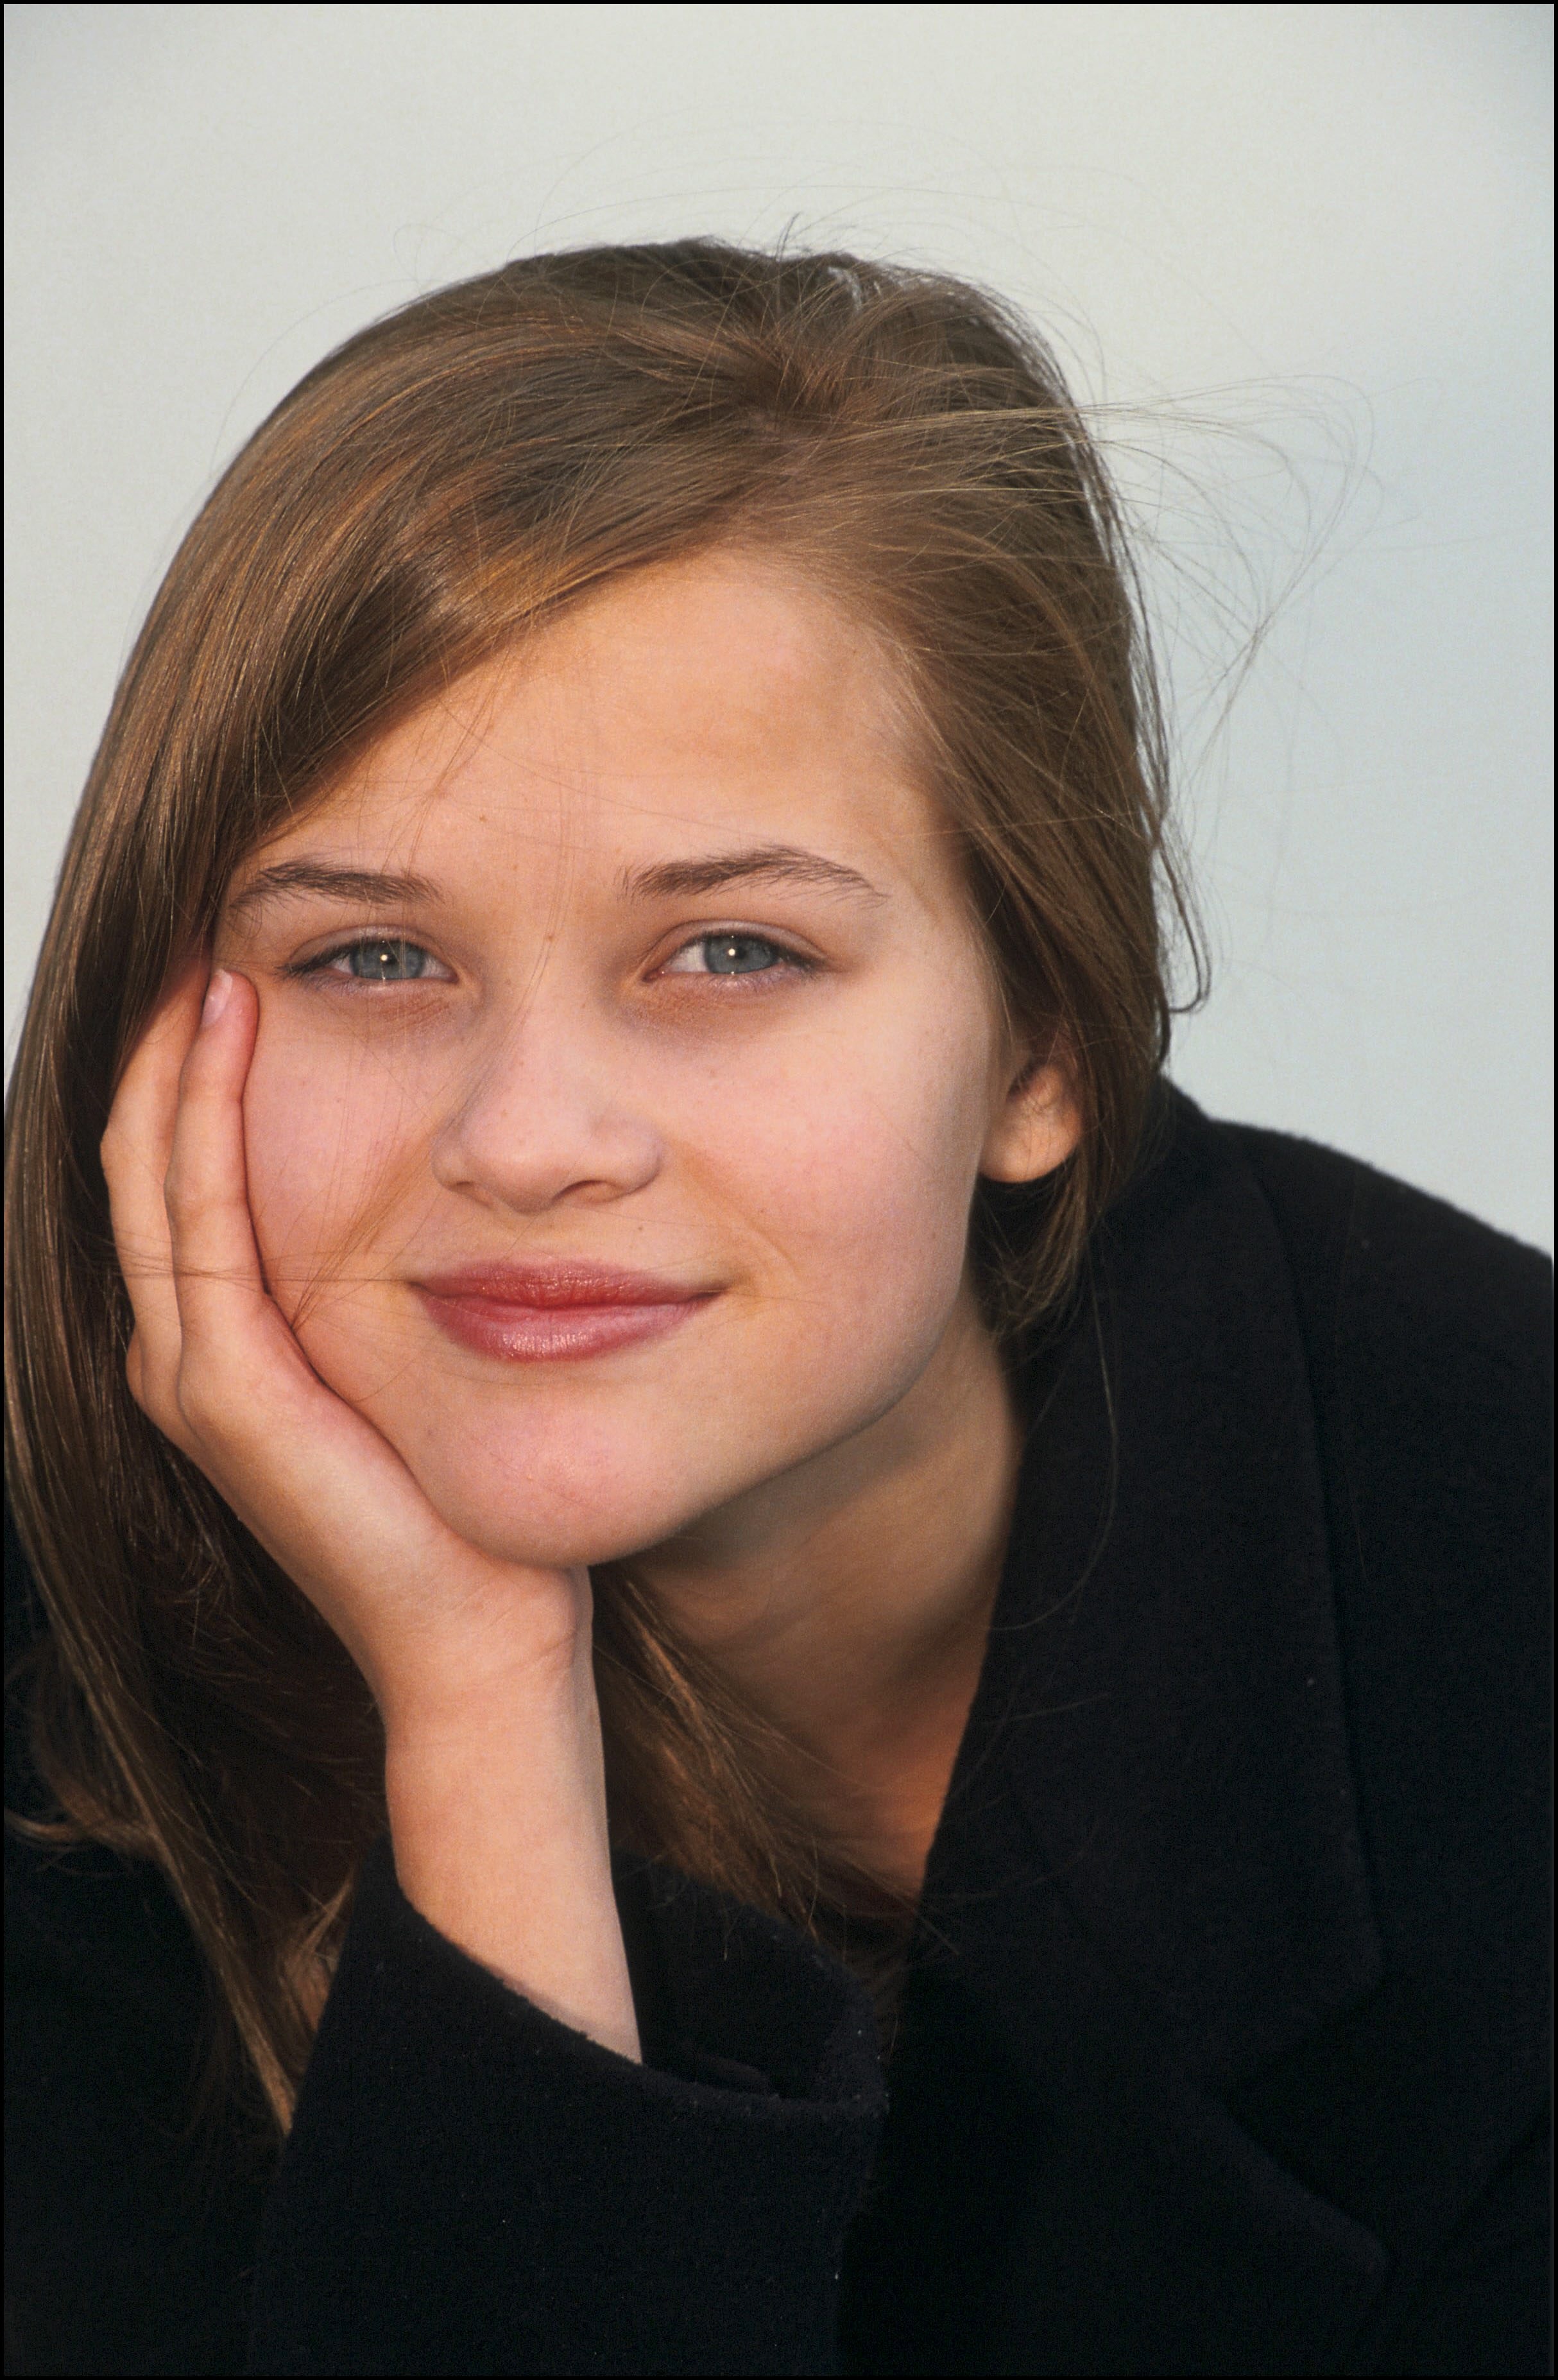 Reese Witherspoon on September 8, 1991 in Deauville, France | Source: Getty Images